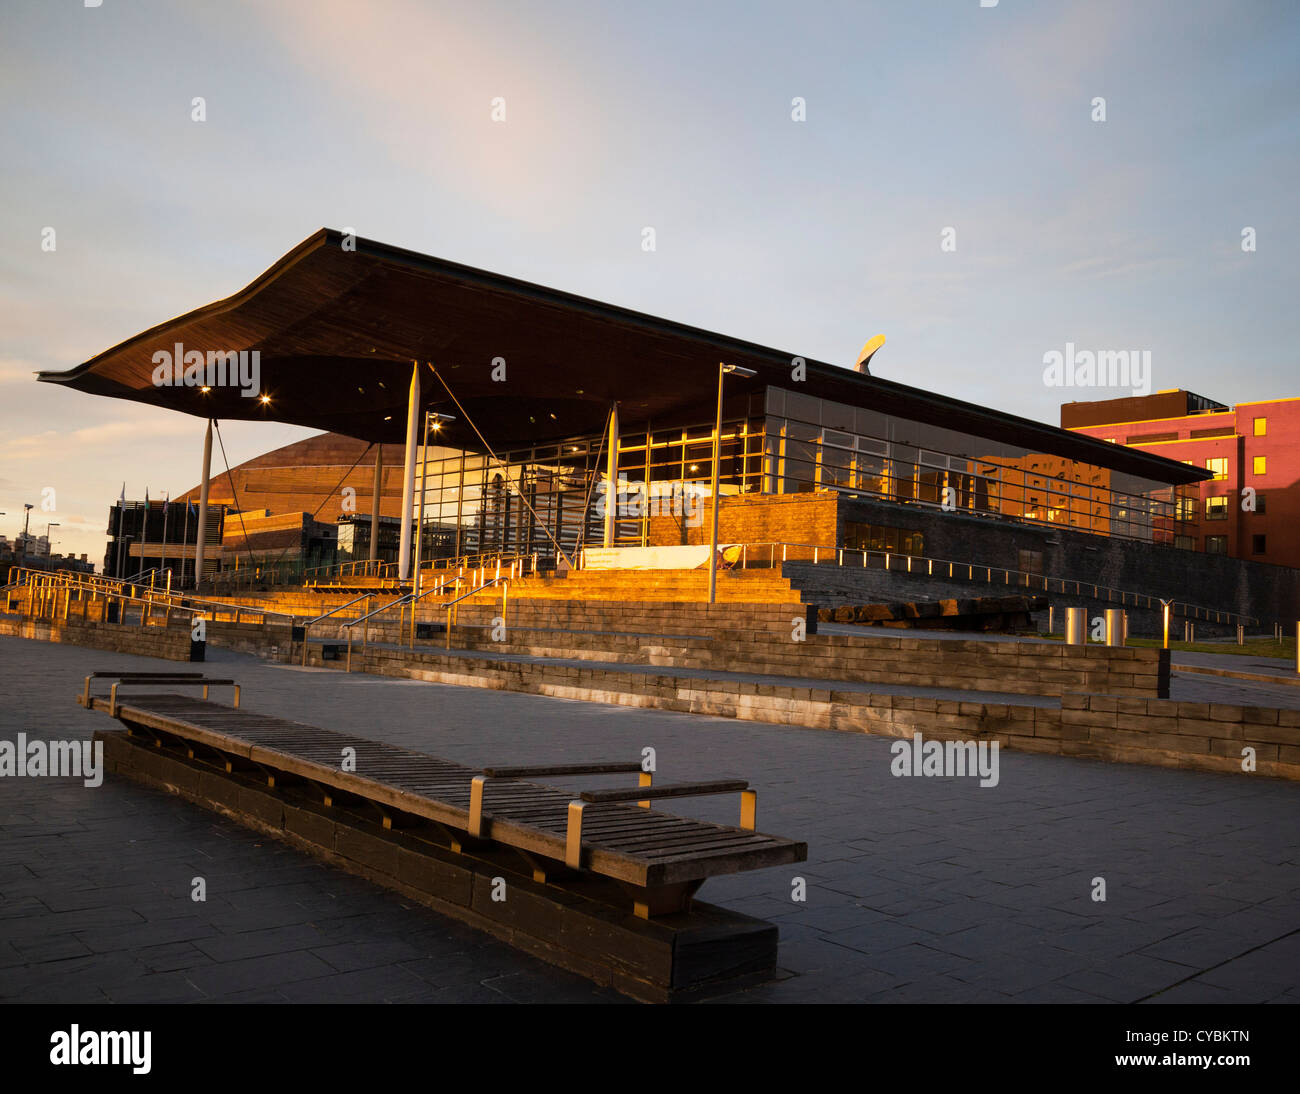 Welsh National Assembly Building, Cardiff, Wales, UK Stockfoto